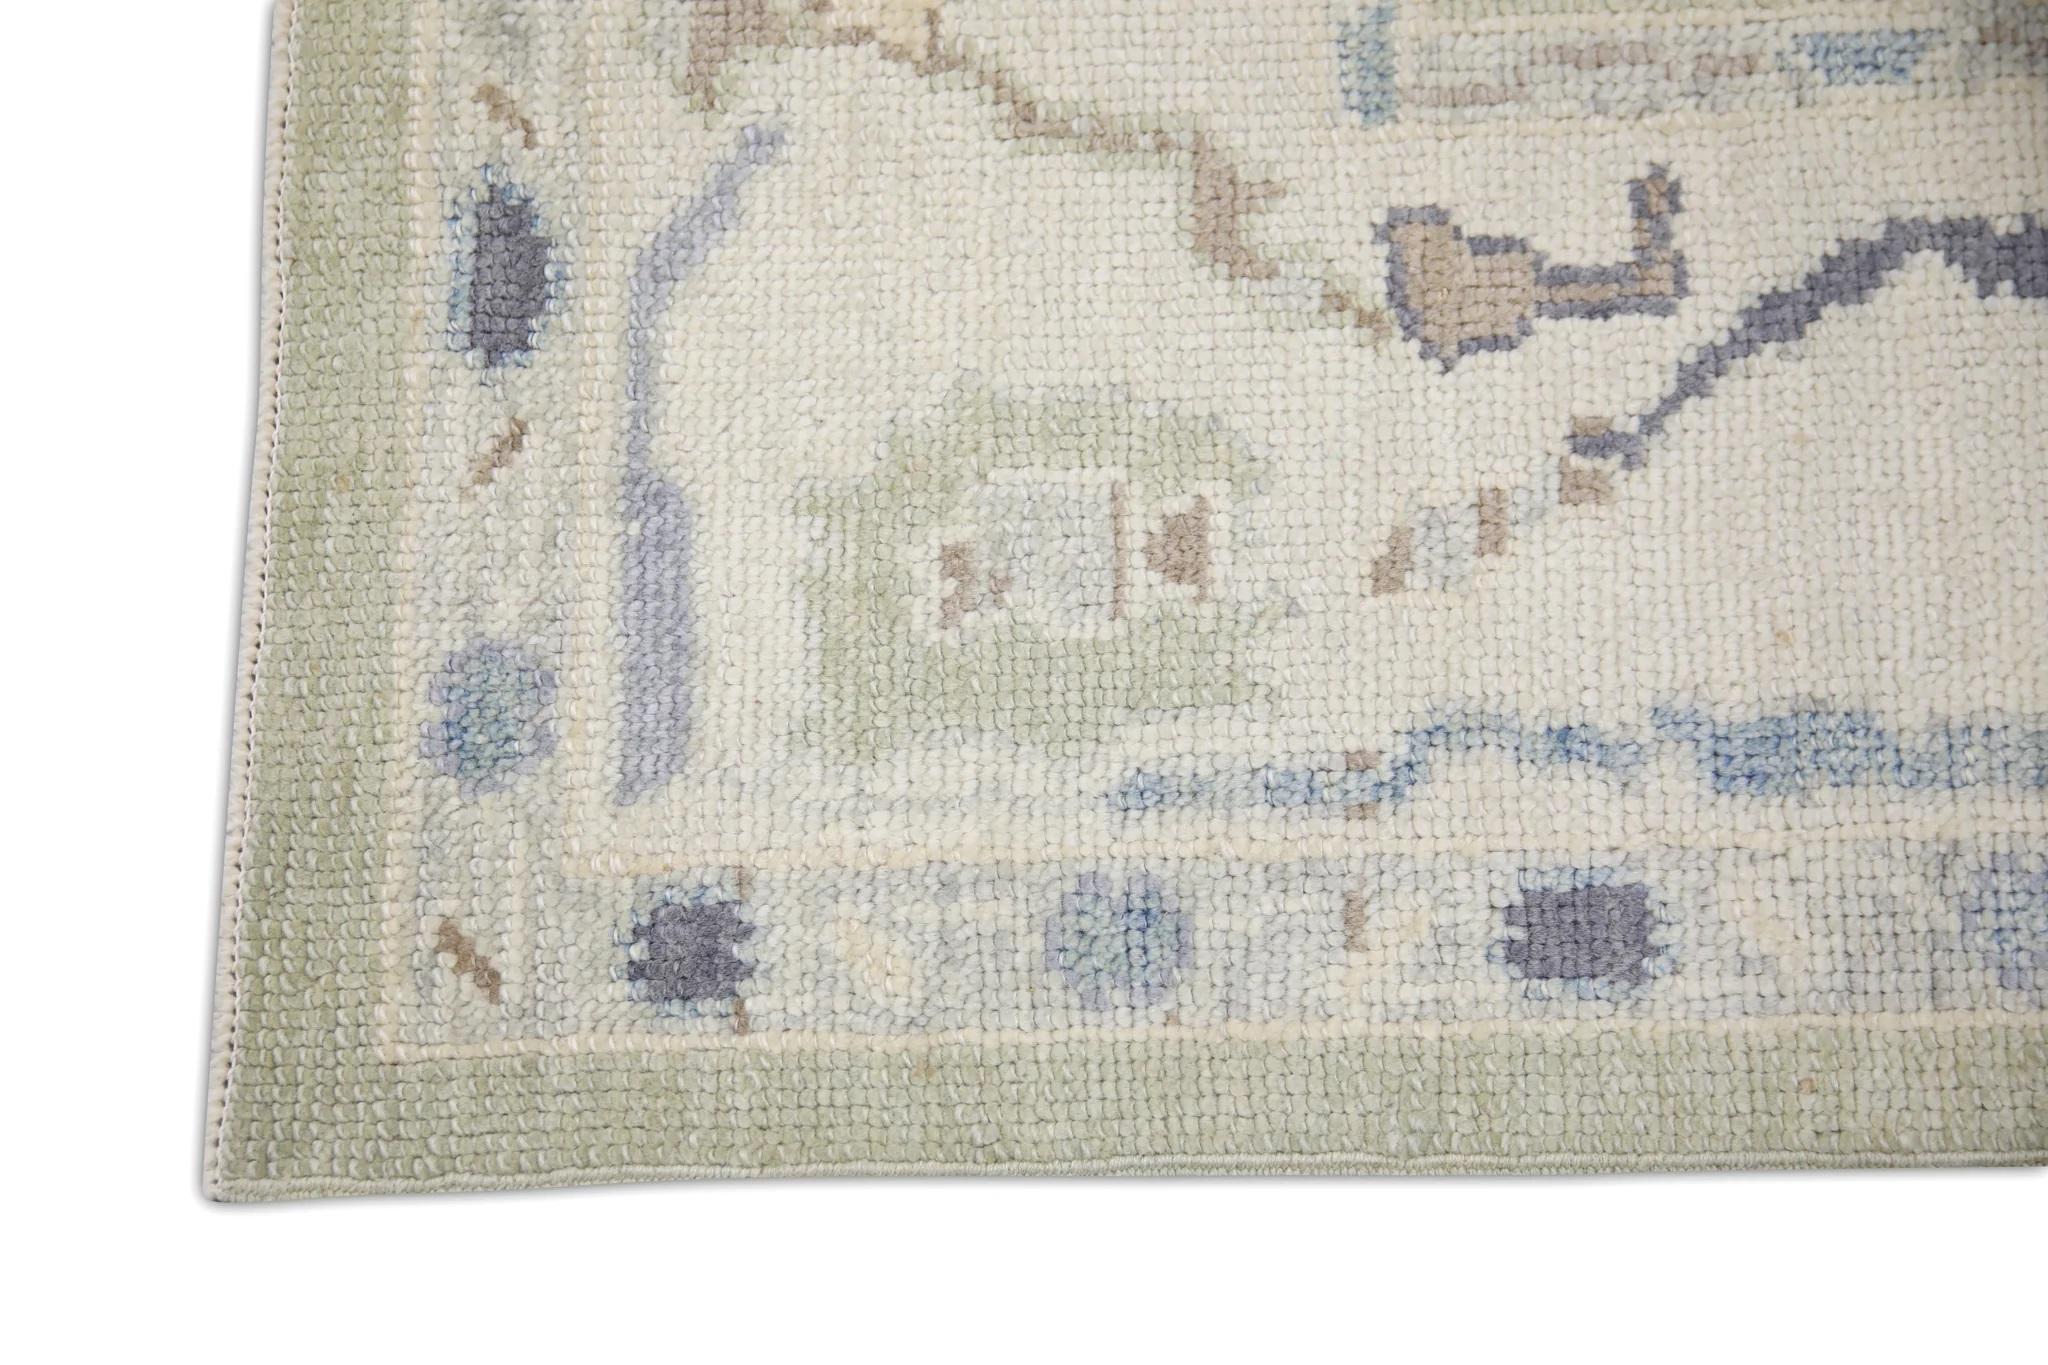 Pale Green Floral Handwoven Wool Turkish Oushak Rug 6' x 8'7